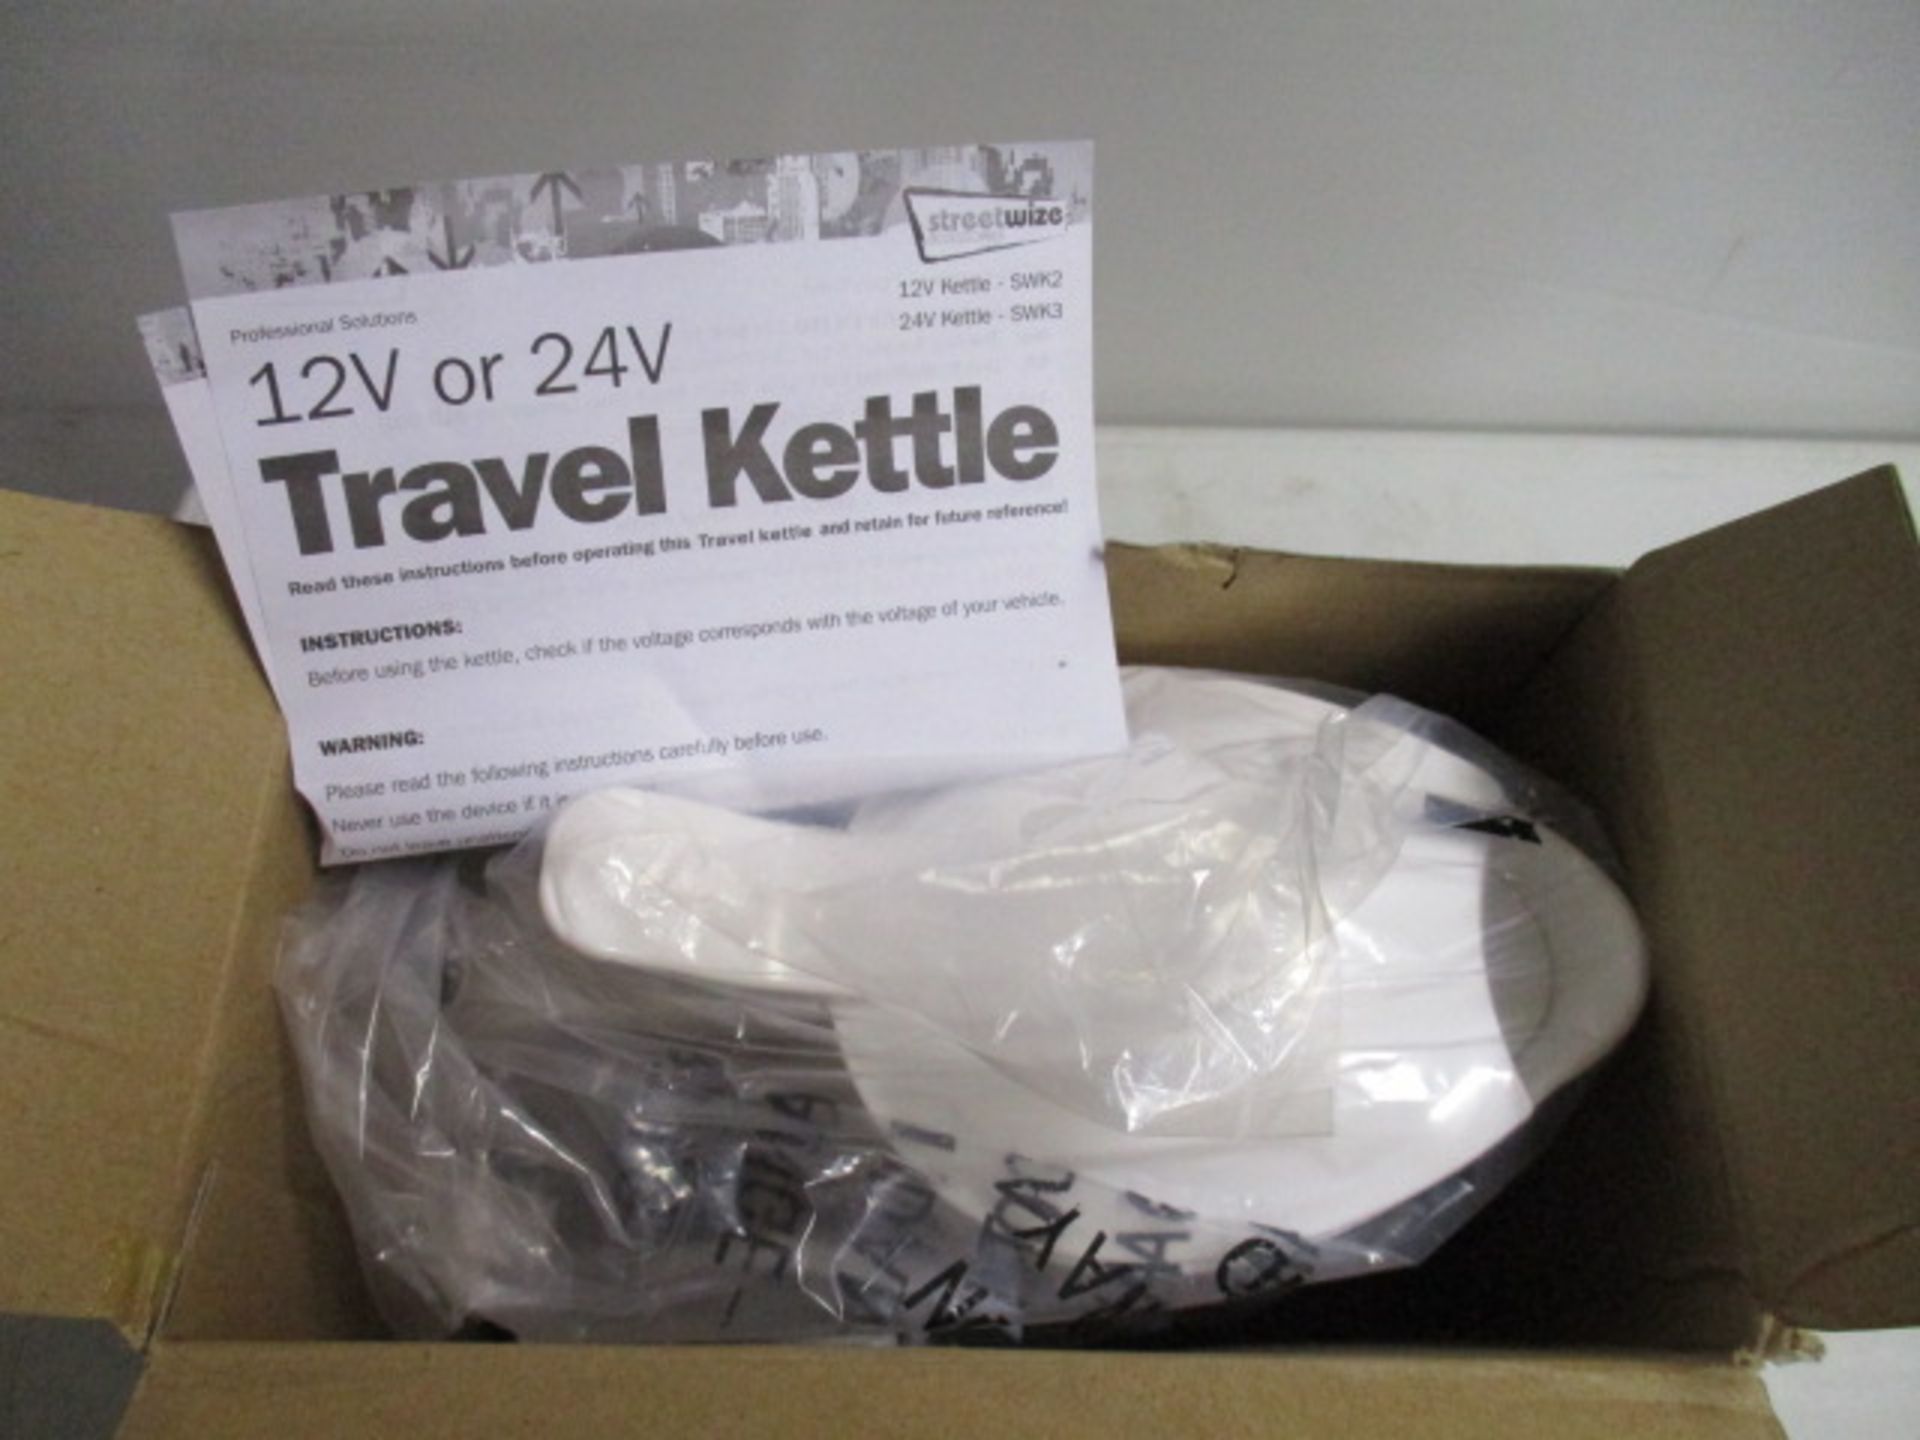 Brand new Streetwize 1 litre travel kettle 12V - Image 2 of 2